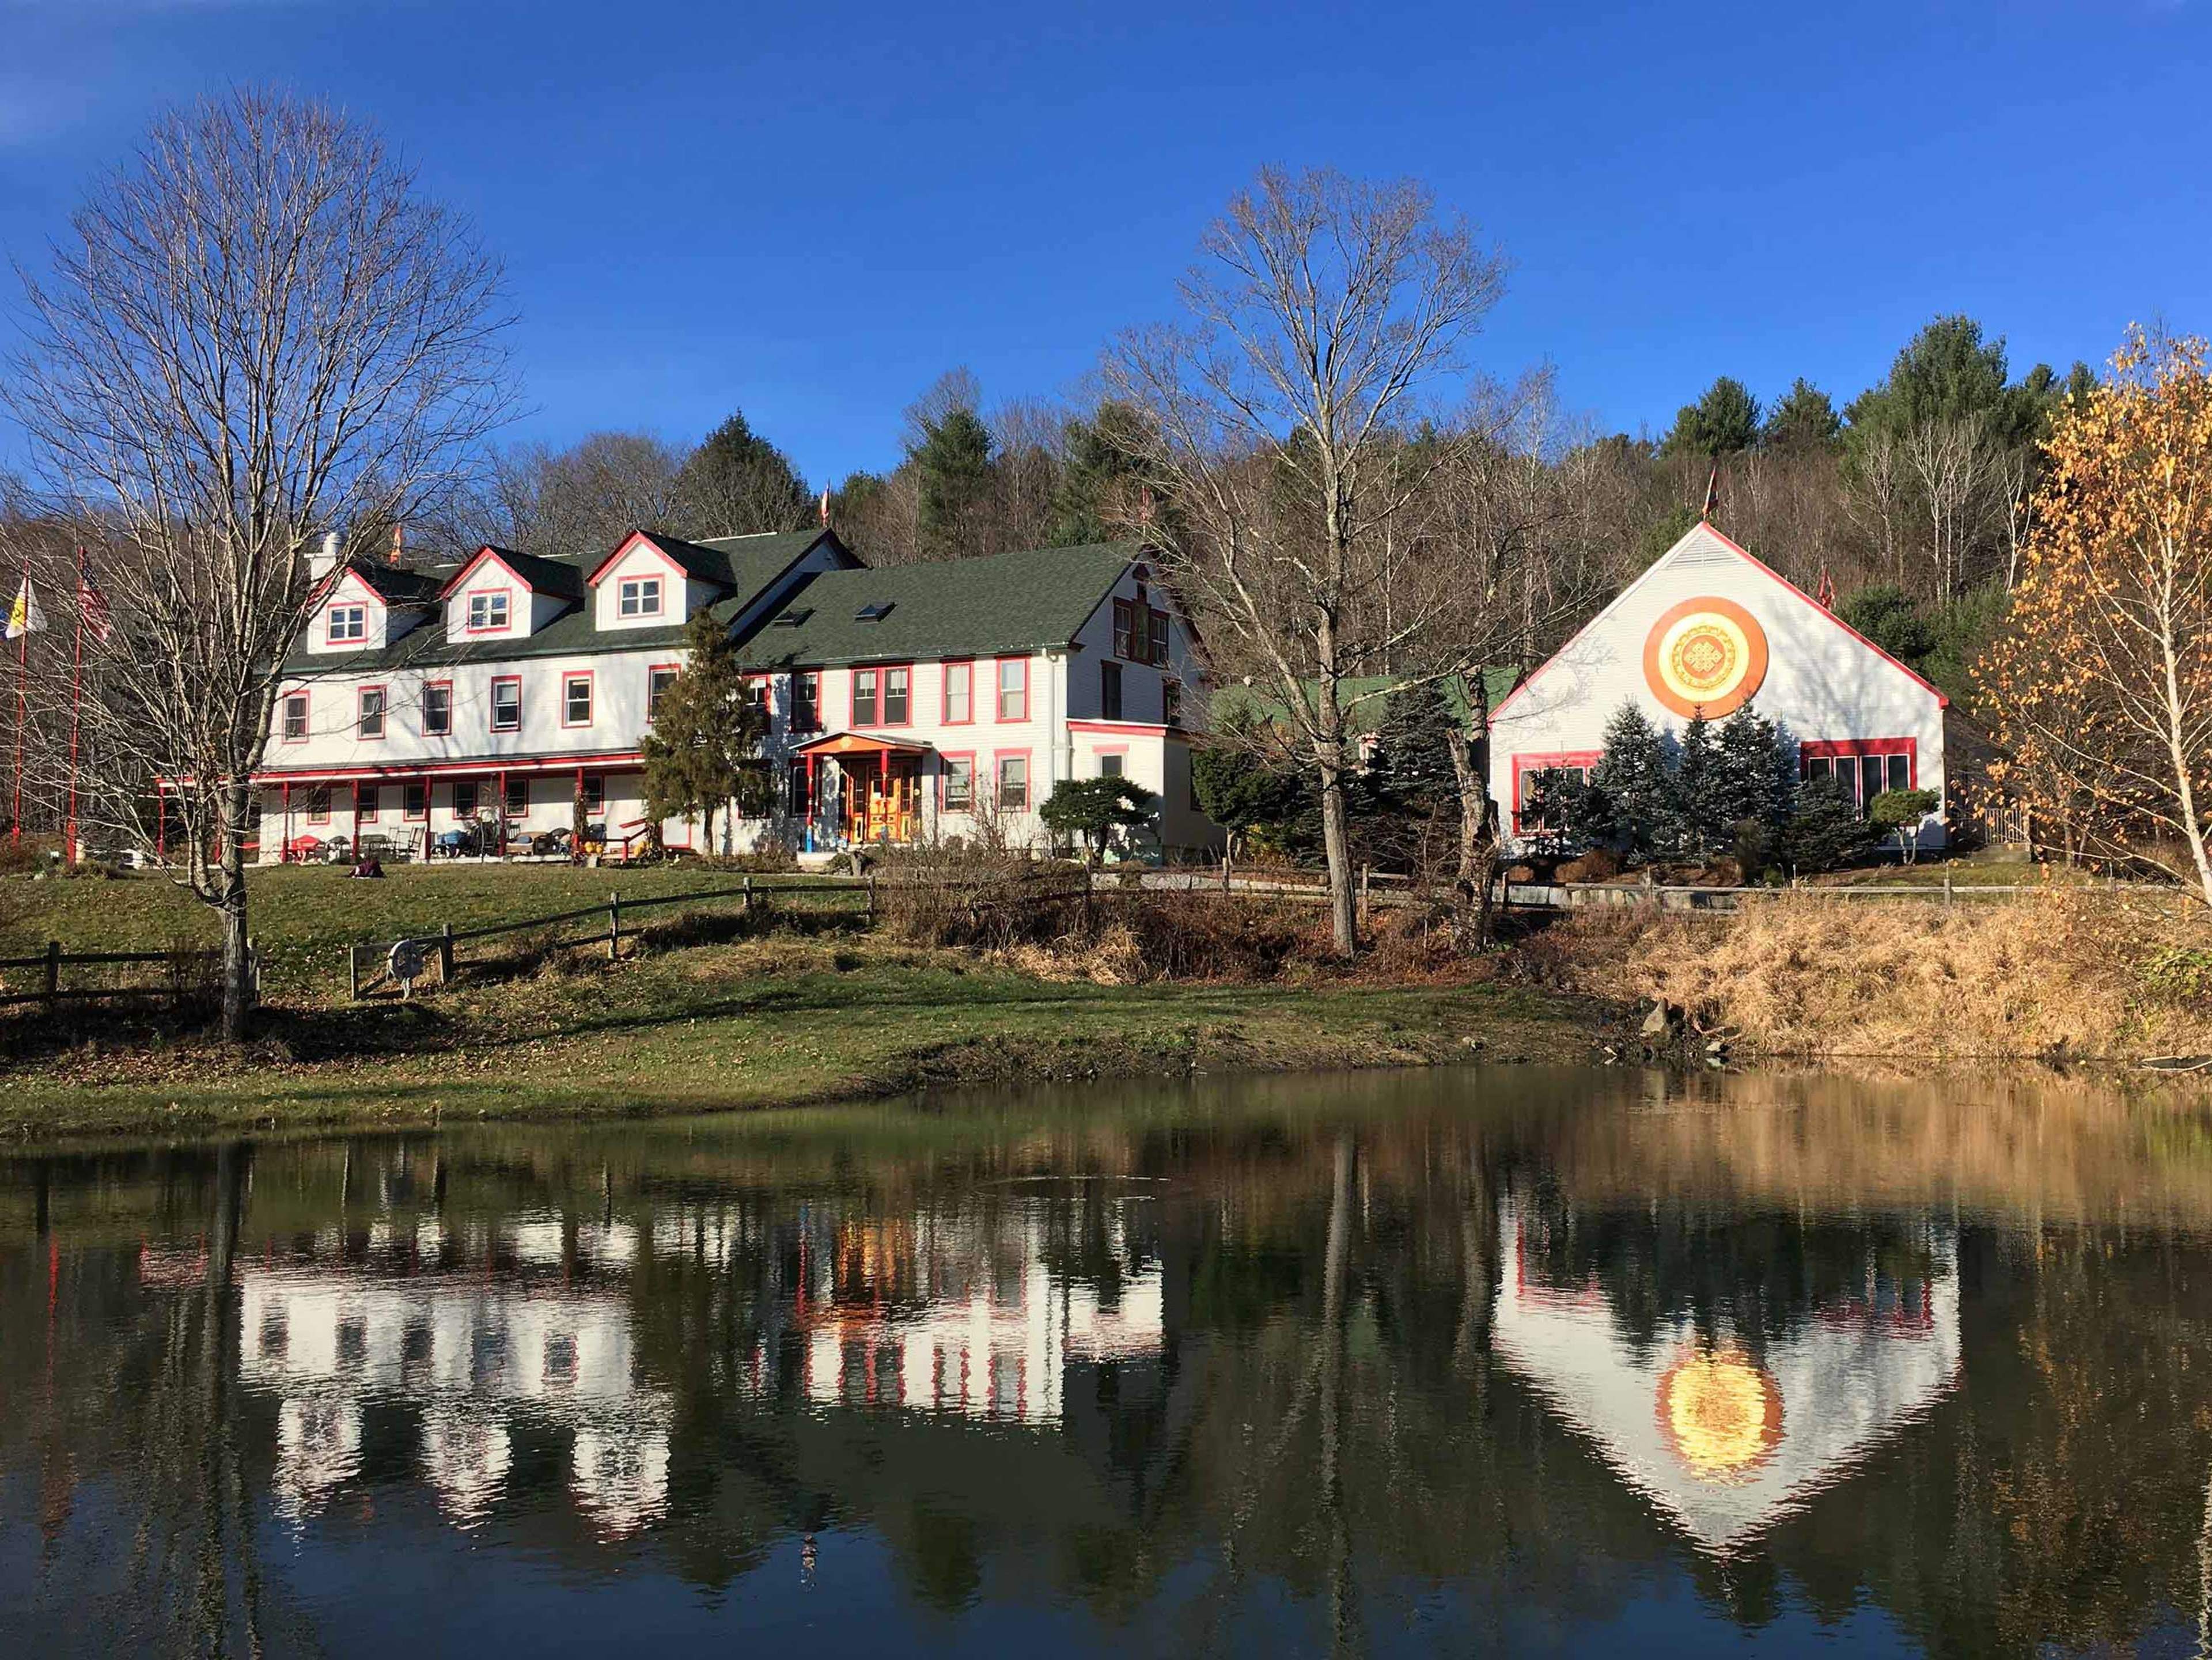 Live at a Buddhist meditation retreat center in Vermont